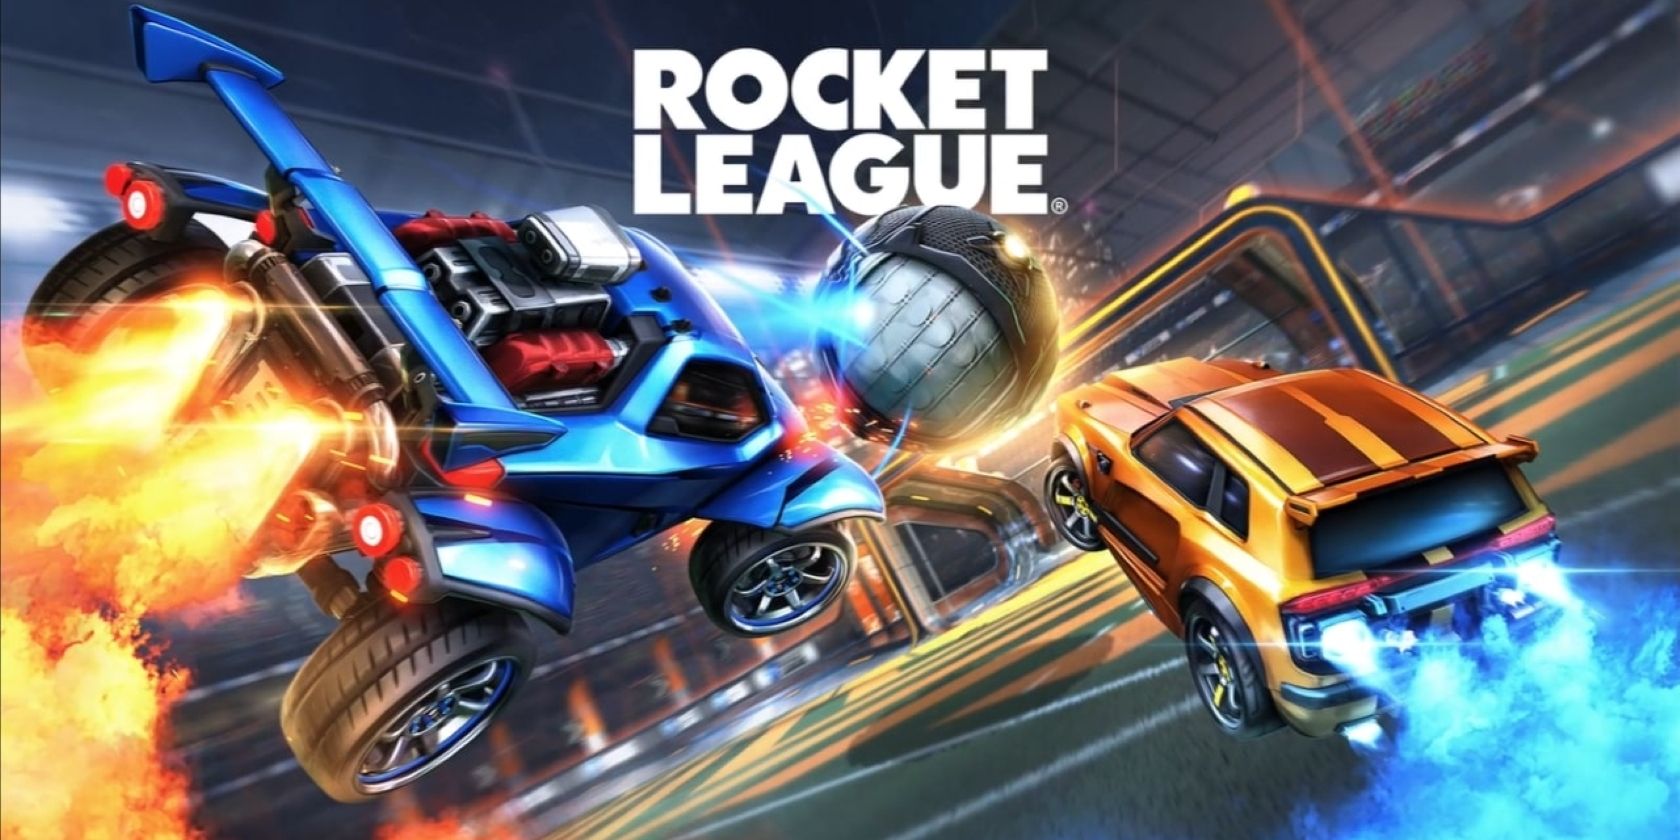 A screenshot of the loading screen for Rocket League on Xbox Series X